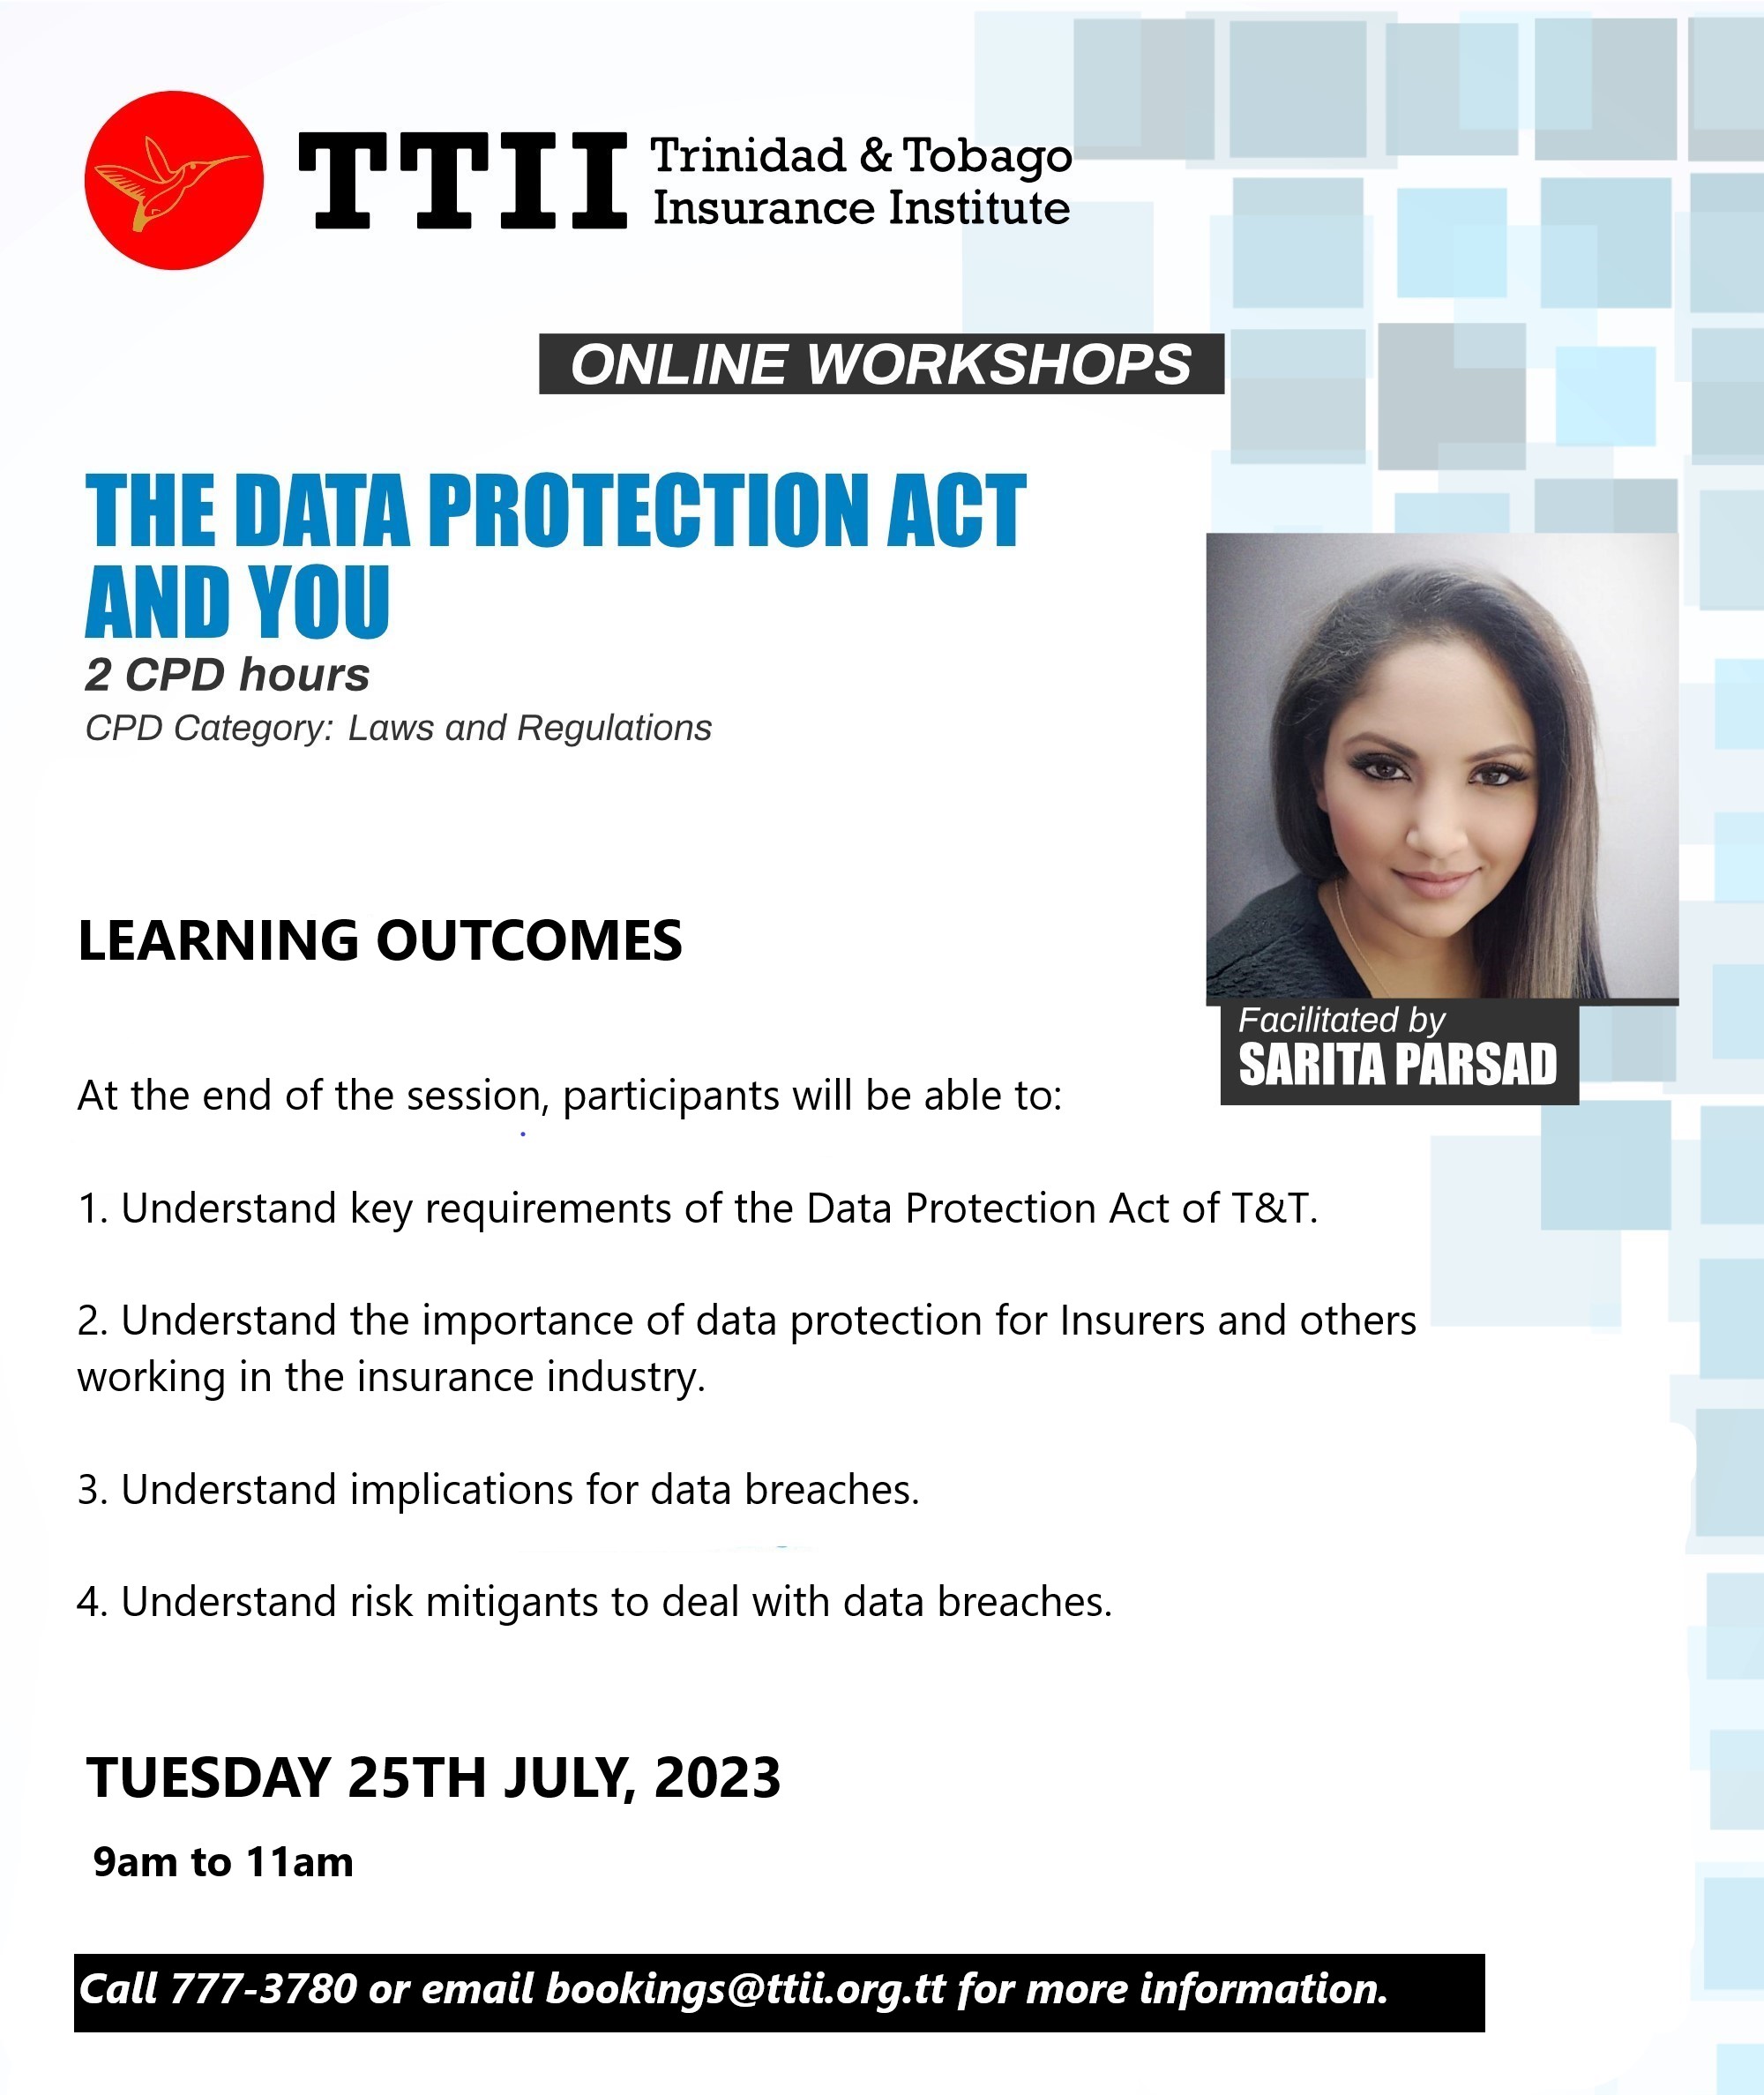 The Data Protection Act and You